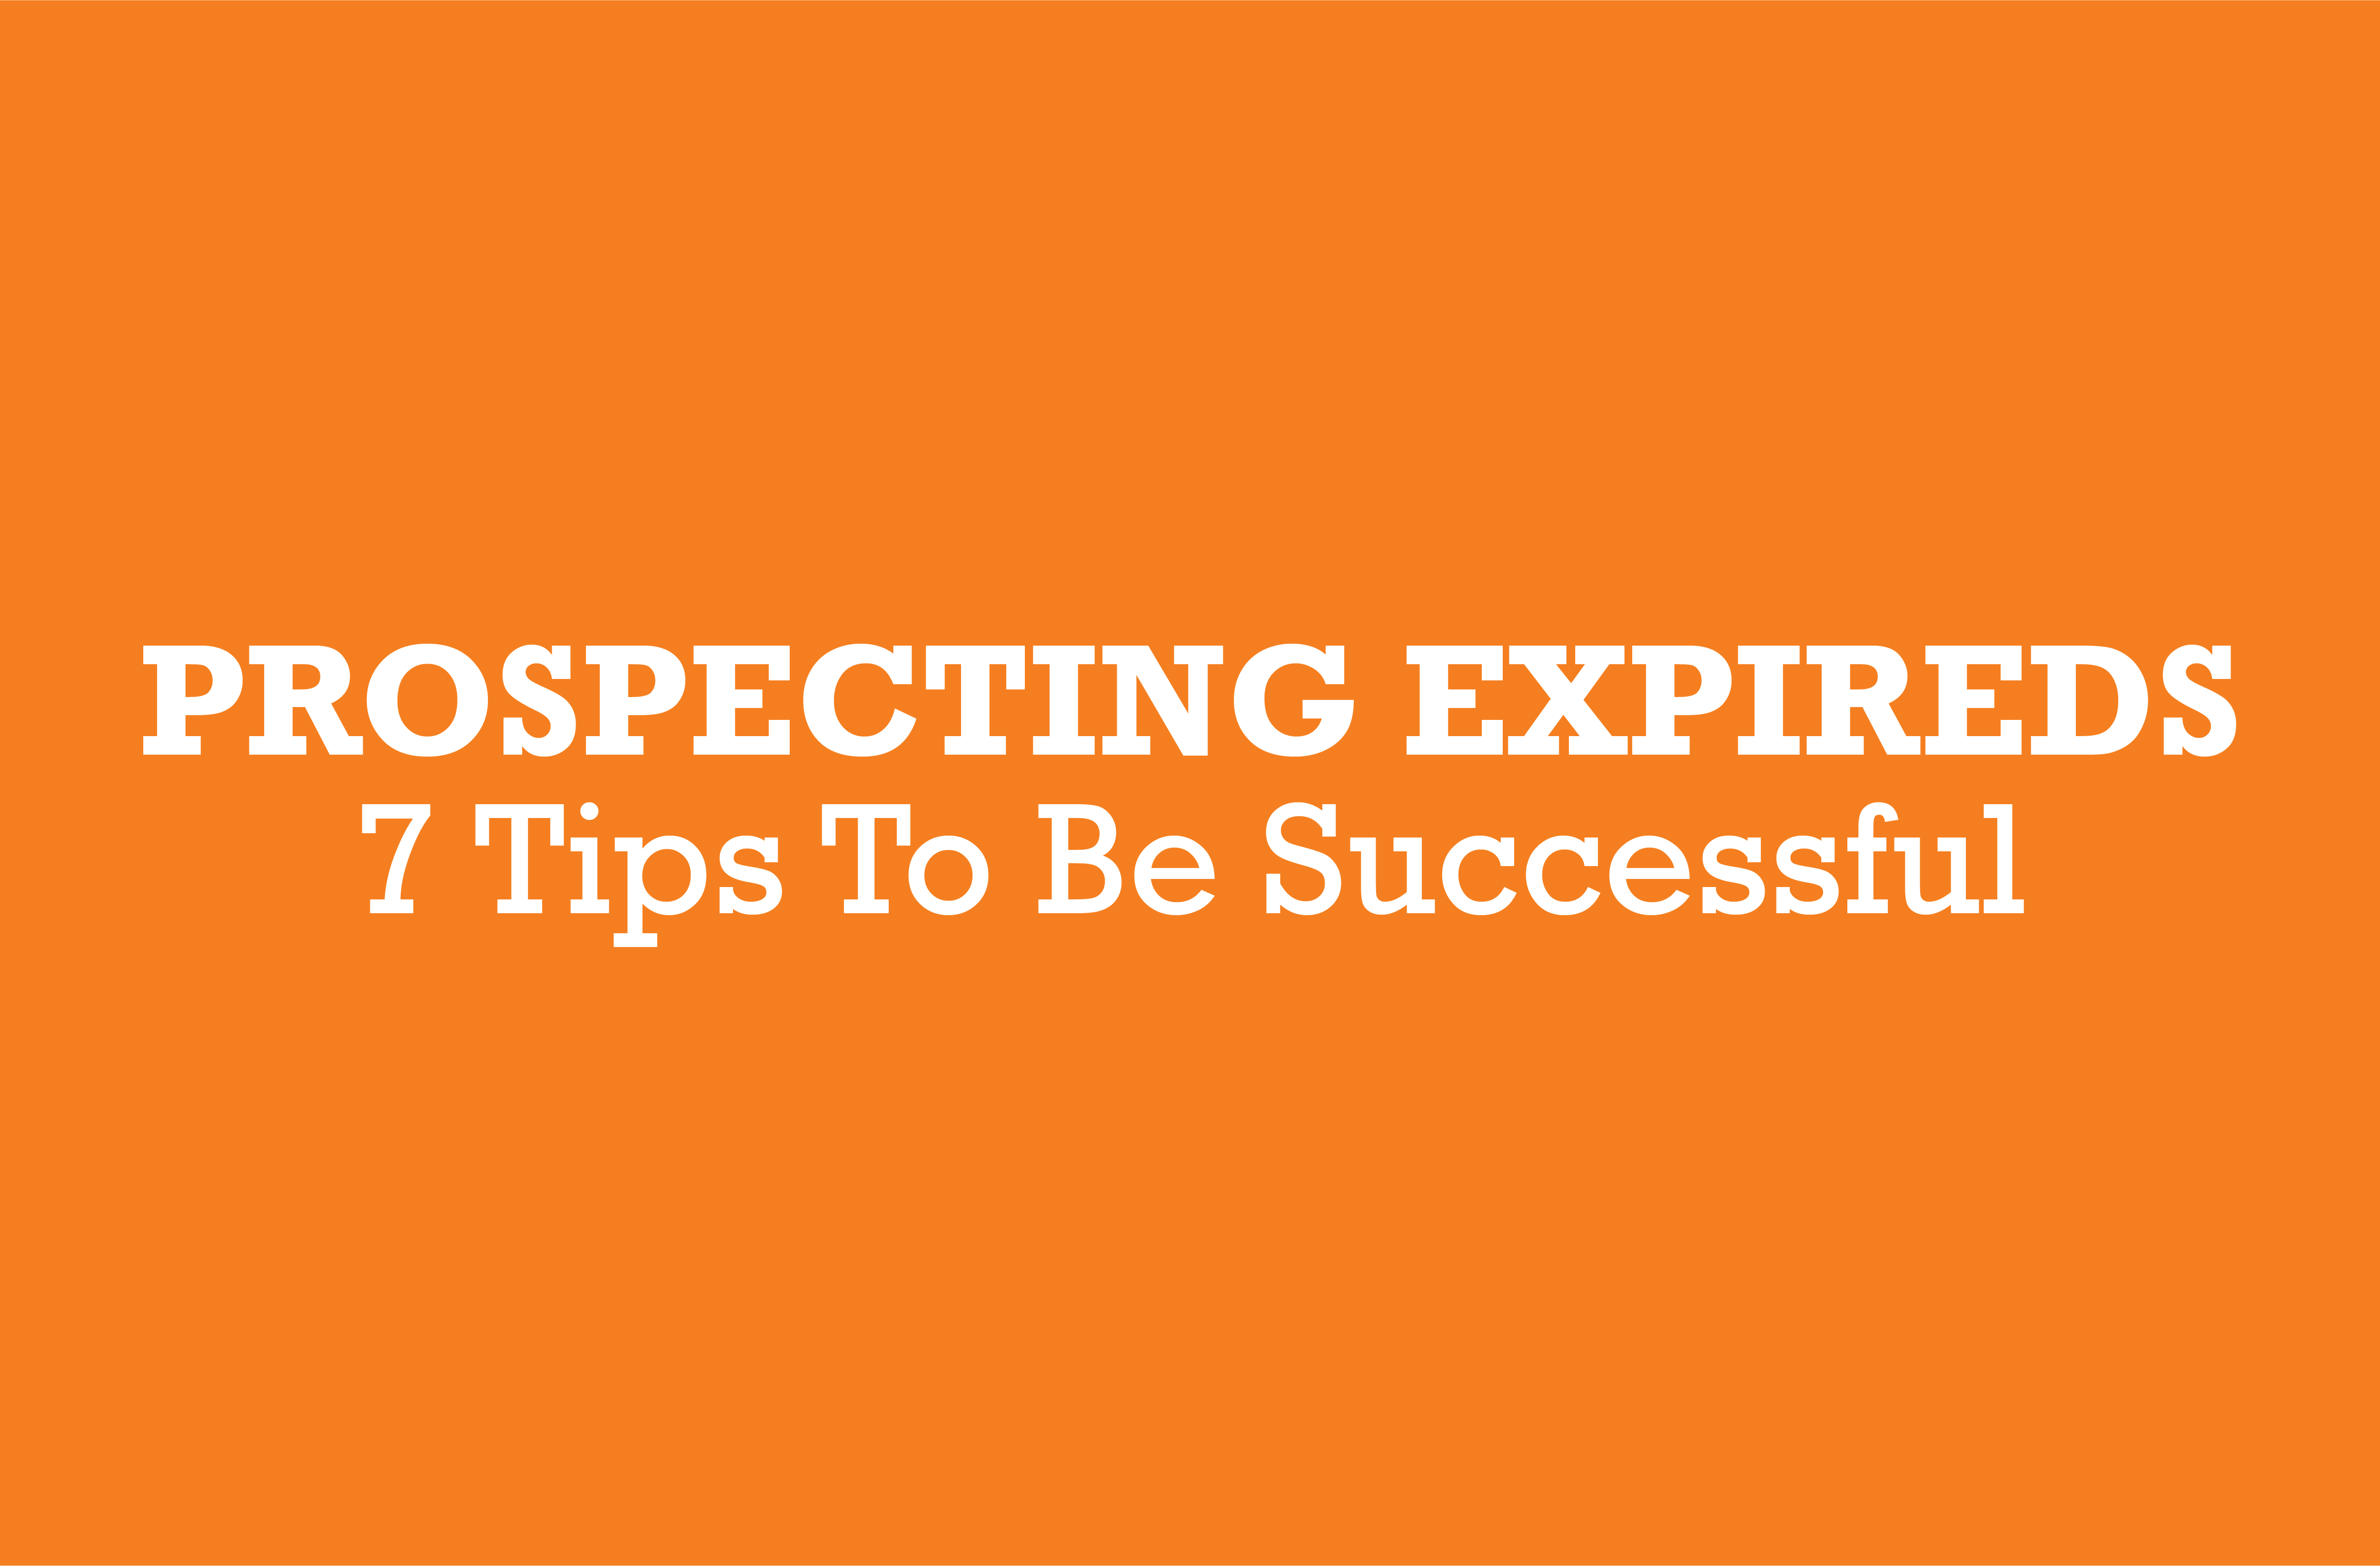 Prospecting Expireds: 7 Tips to be Successful